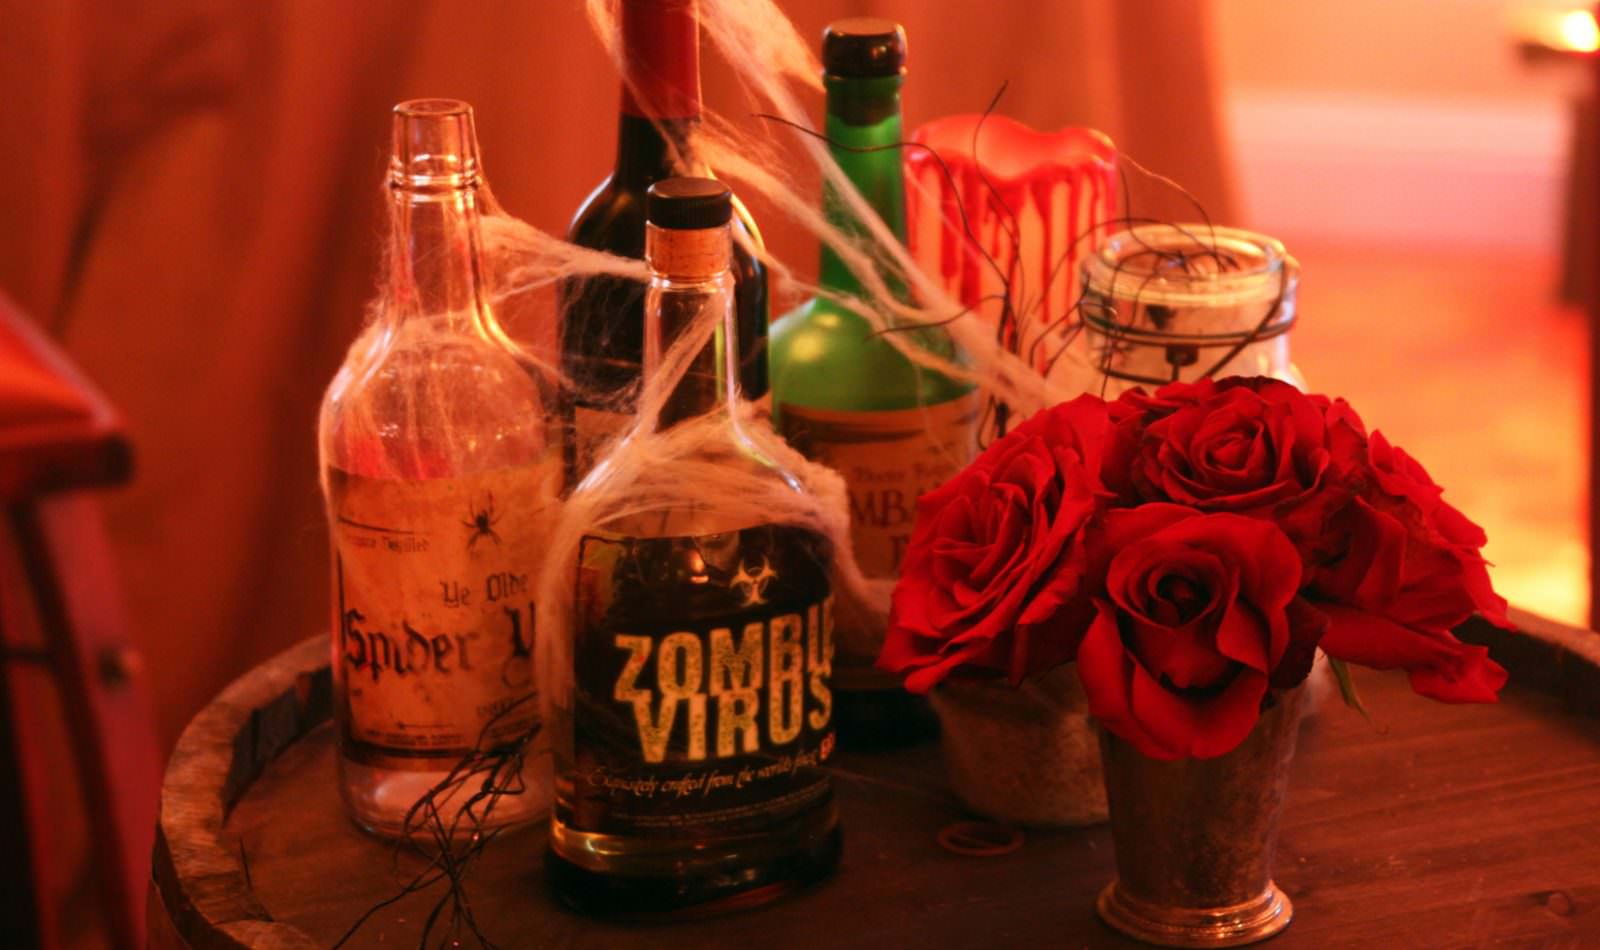 alcohol bottles covered in decorative spider webs next to red roses